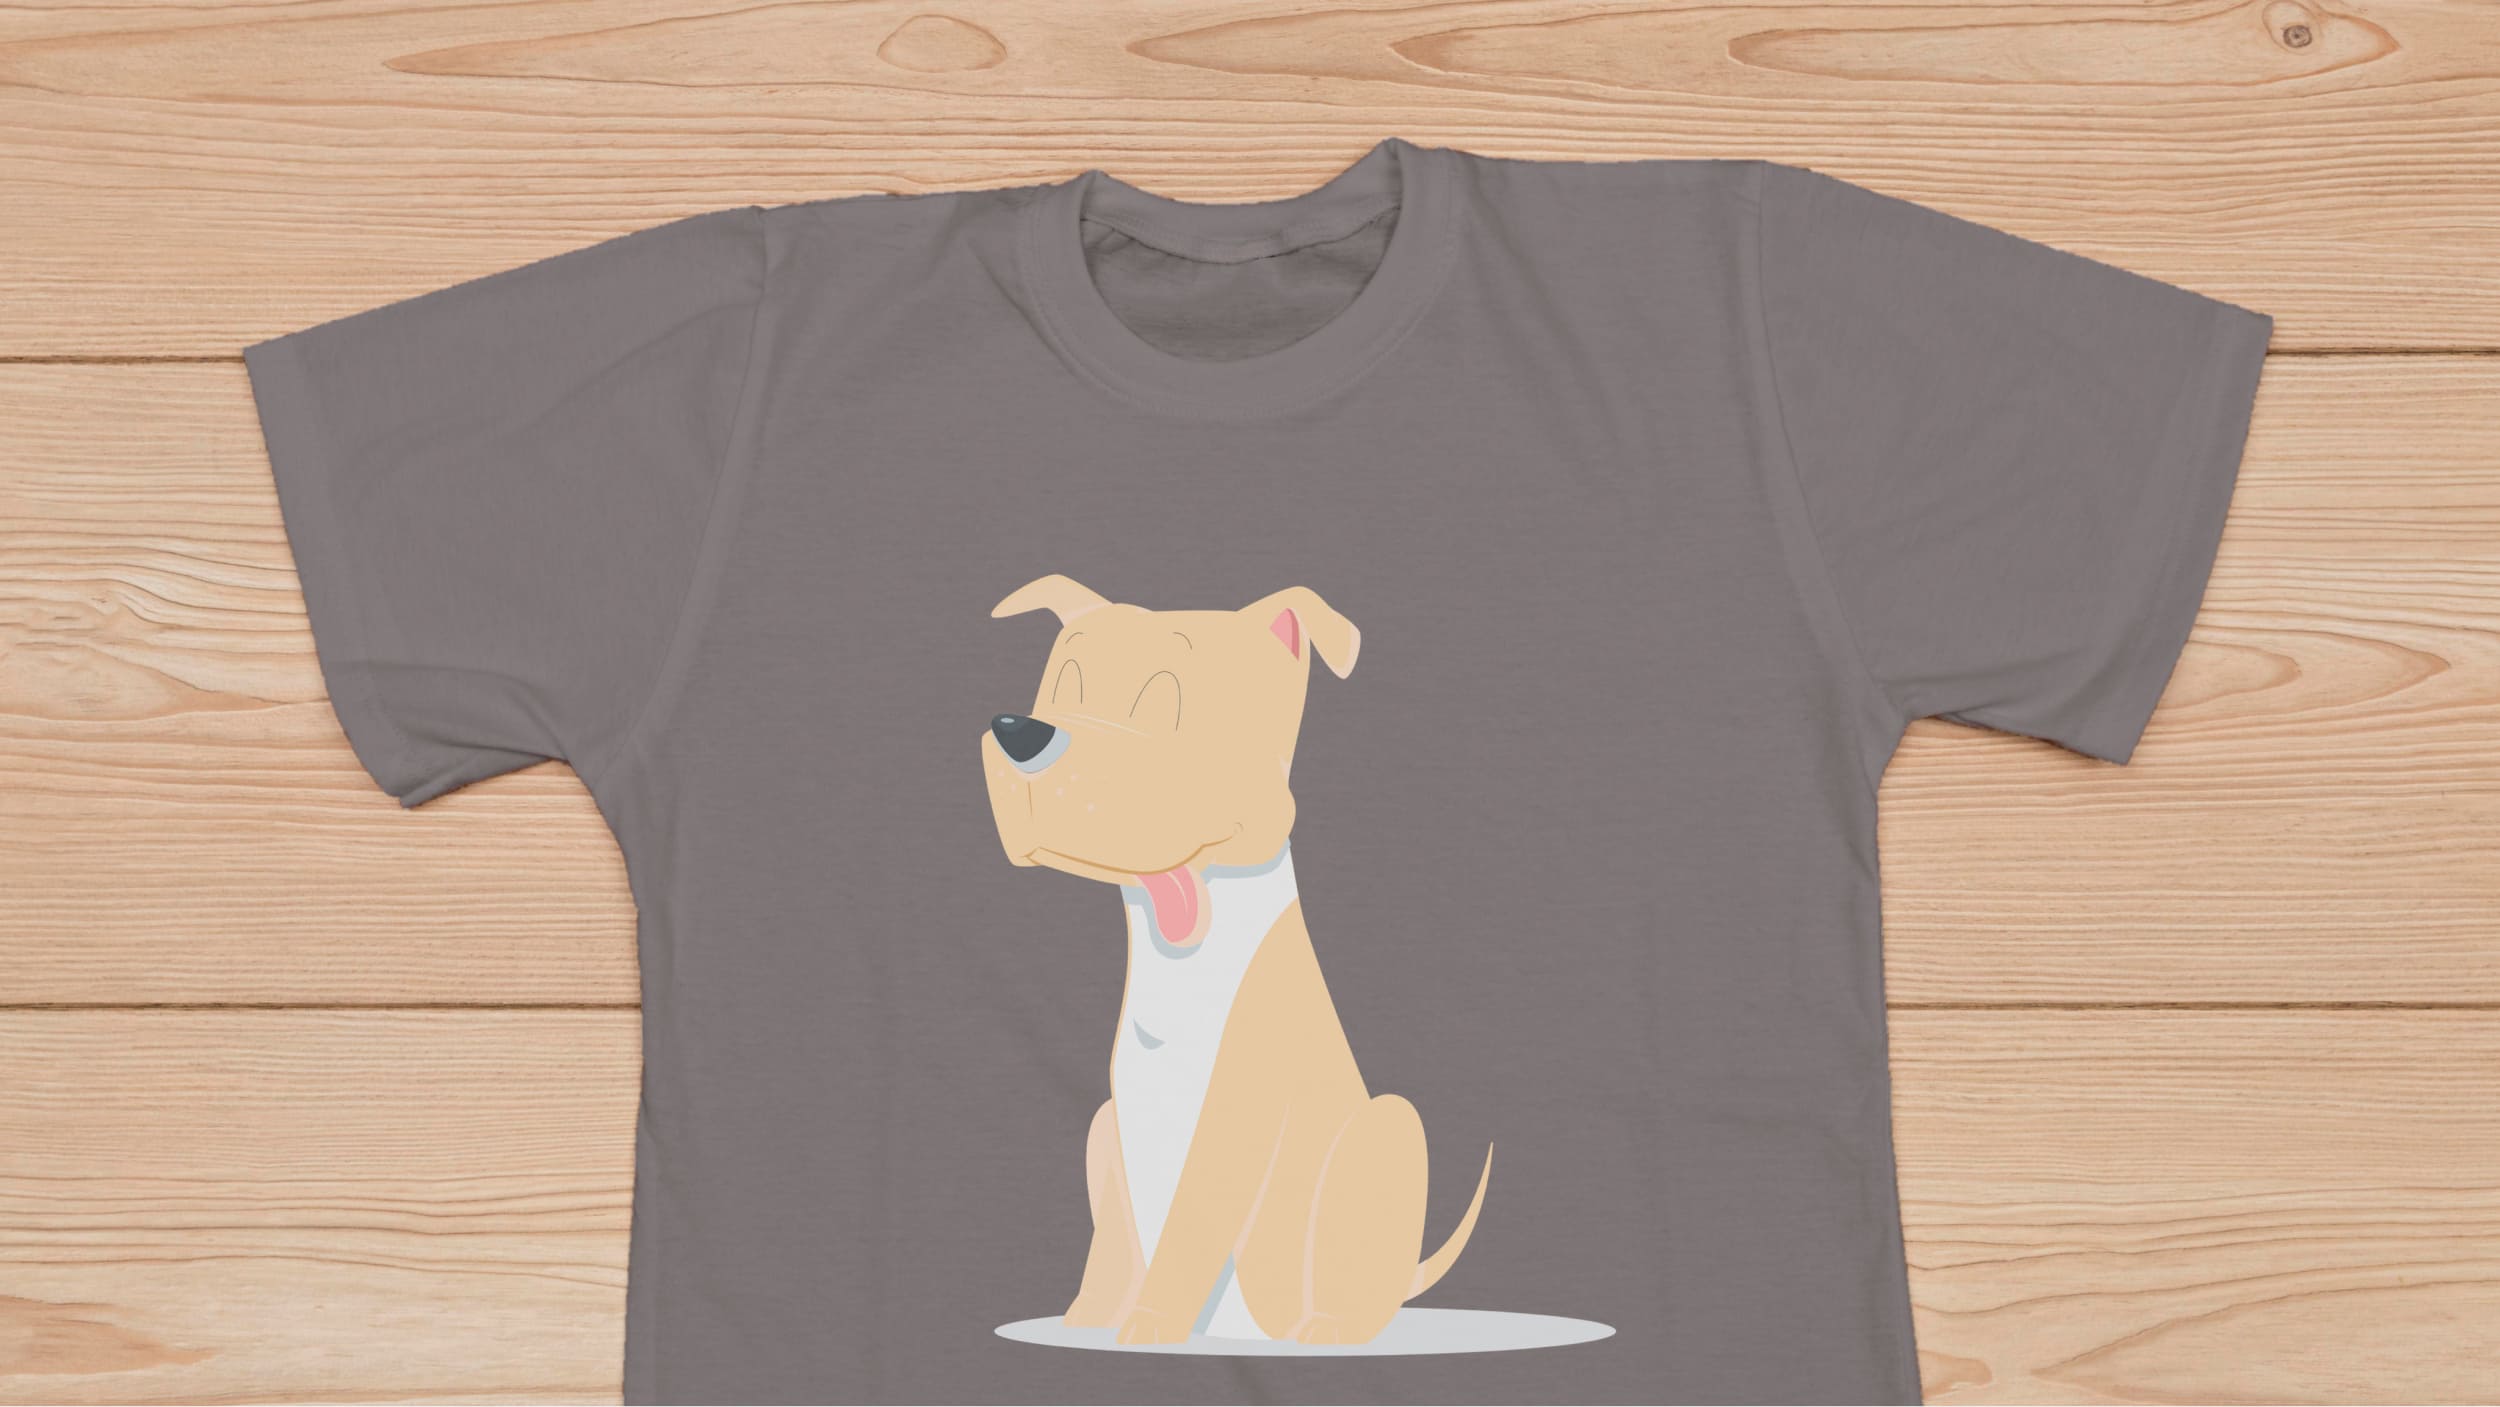 Gray t-shirt with a cute ginger pitbull on the wooden background.